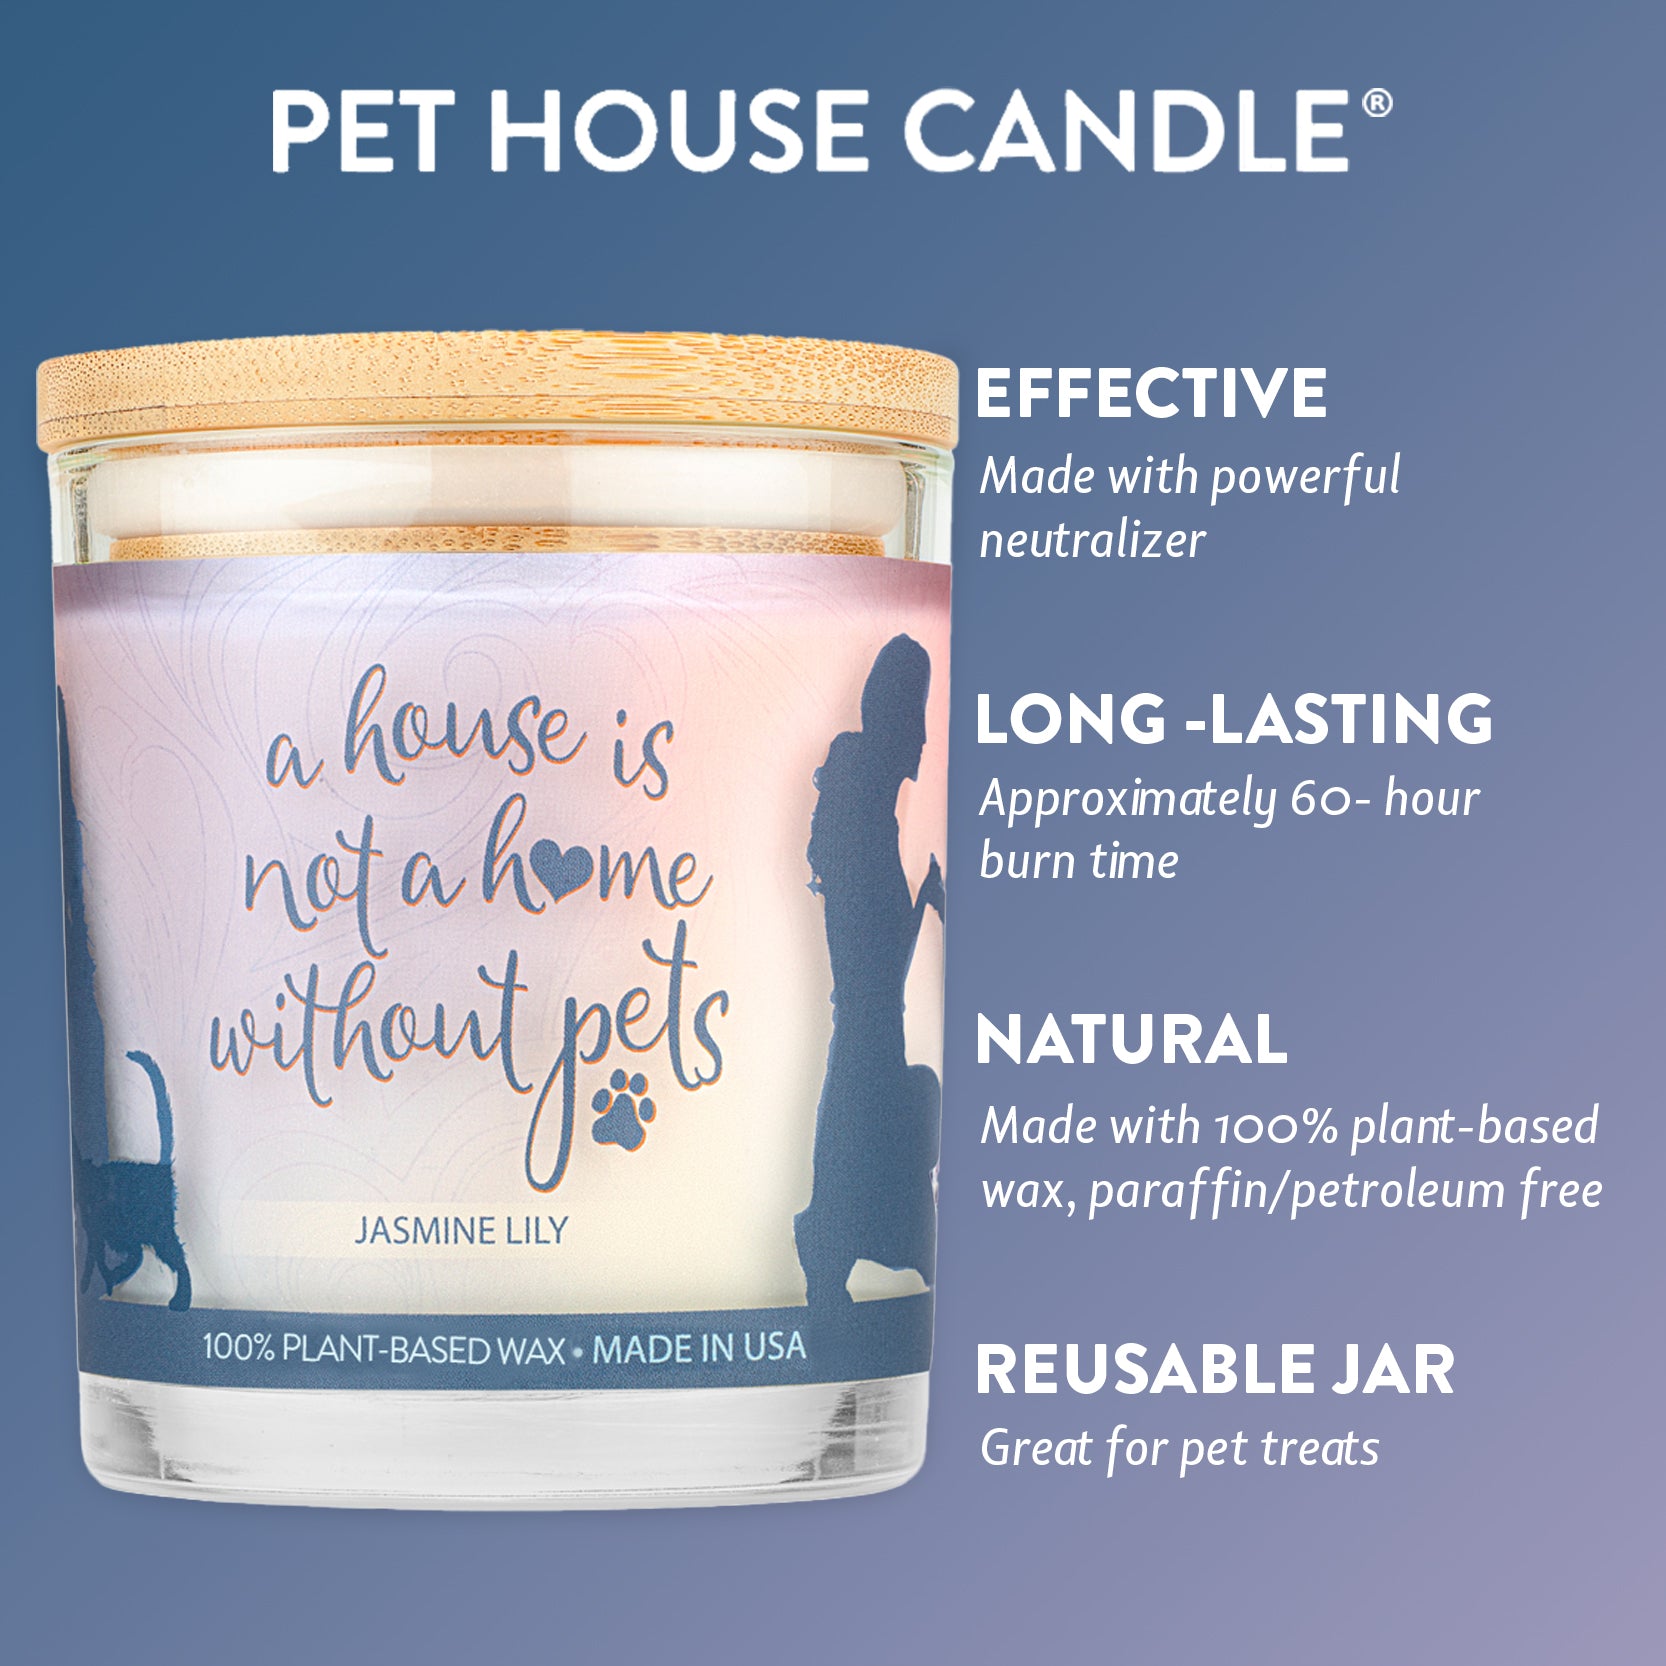 Jasmine Lily Candle infographics